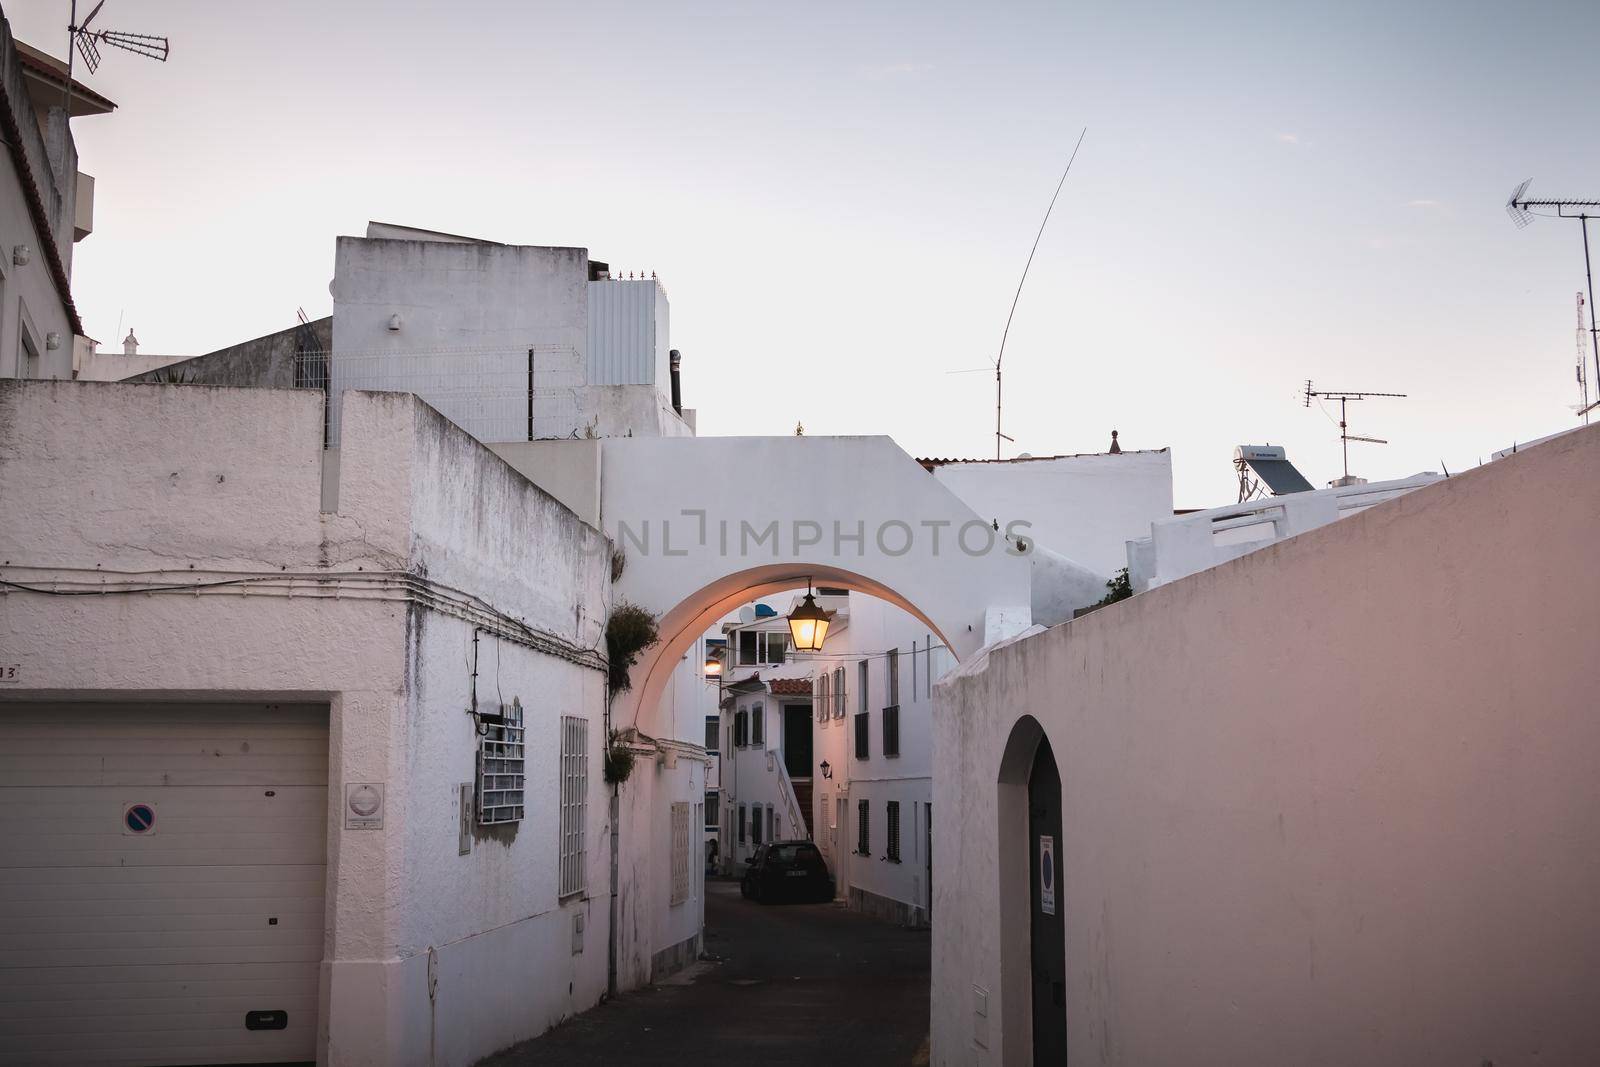 architecture detail of typical houses in Albufeira, Portugal by AtlanticEUROSTOXX